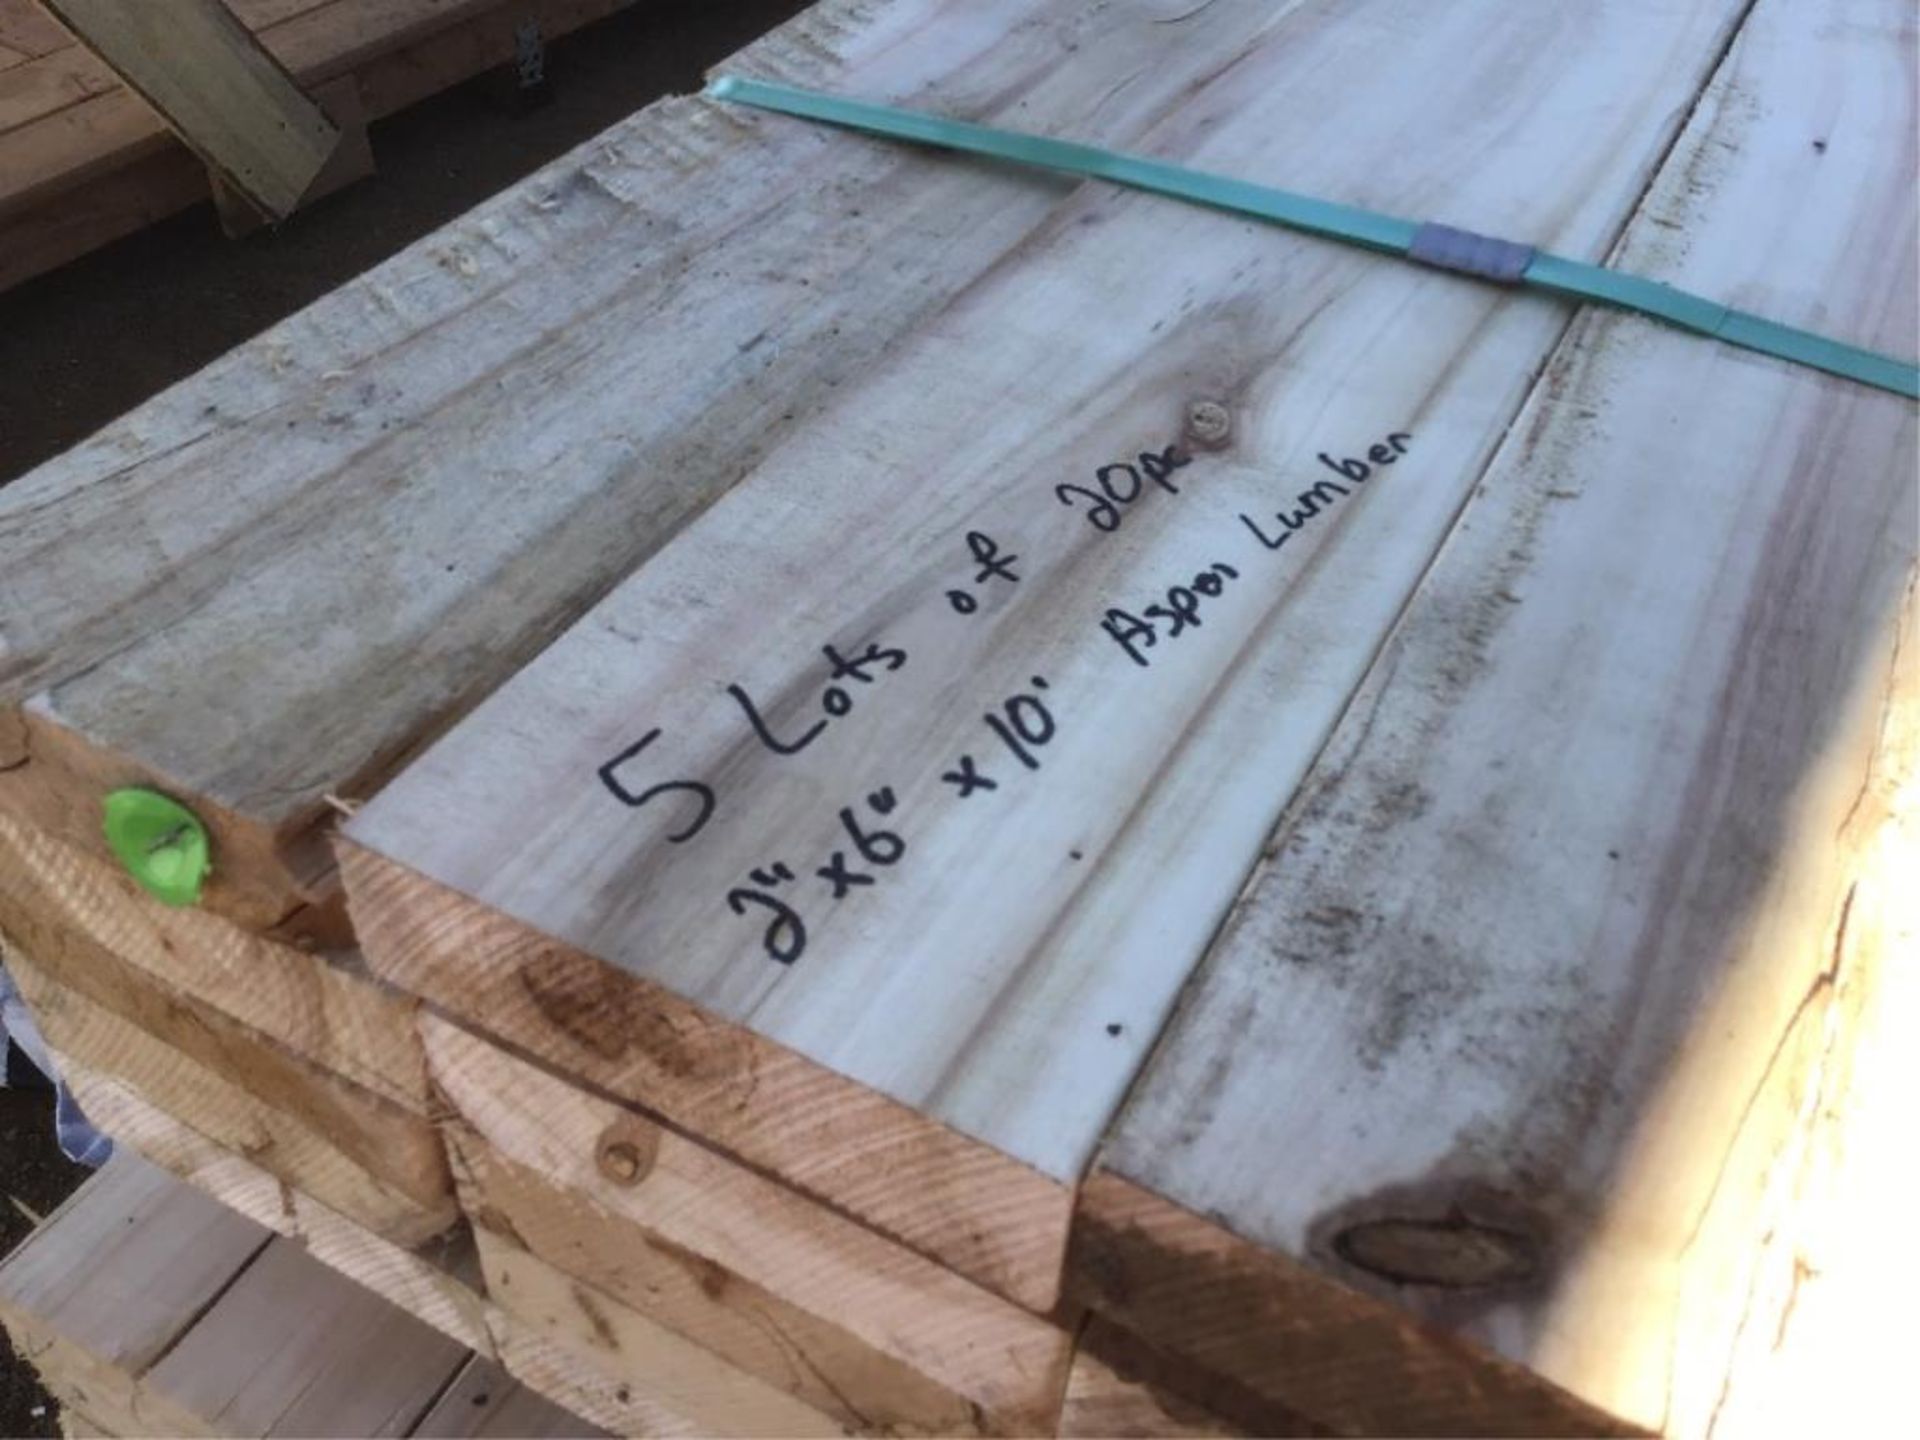 190 20pc of 2"x6" x 10' Planed Aspen/Poplar Lumber Selling by the pc X 20. Lot #s' 188, 189, 190, - Image 2 of 2